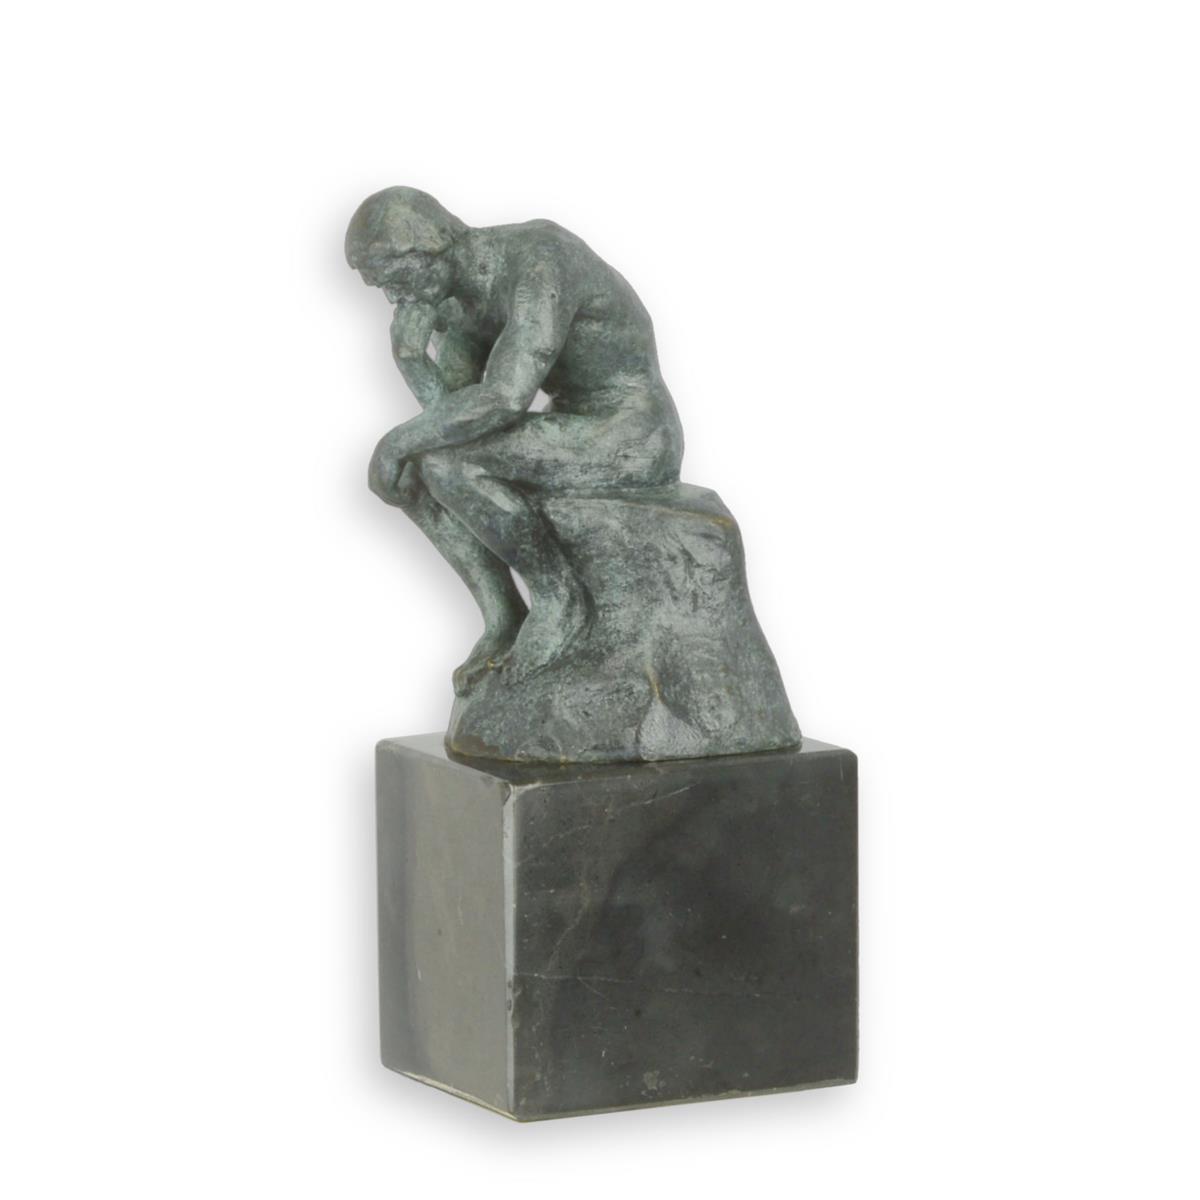 A BRONZE SCULPTURE OF THE THINKER GREEN FINISH